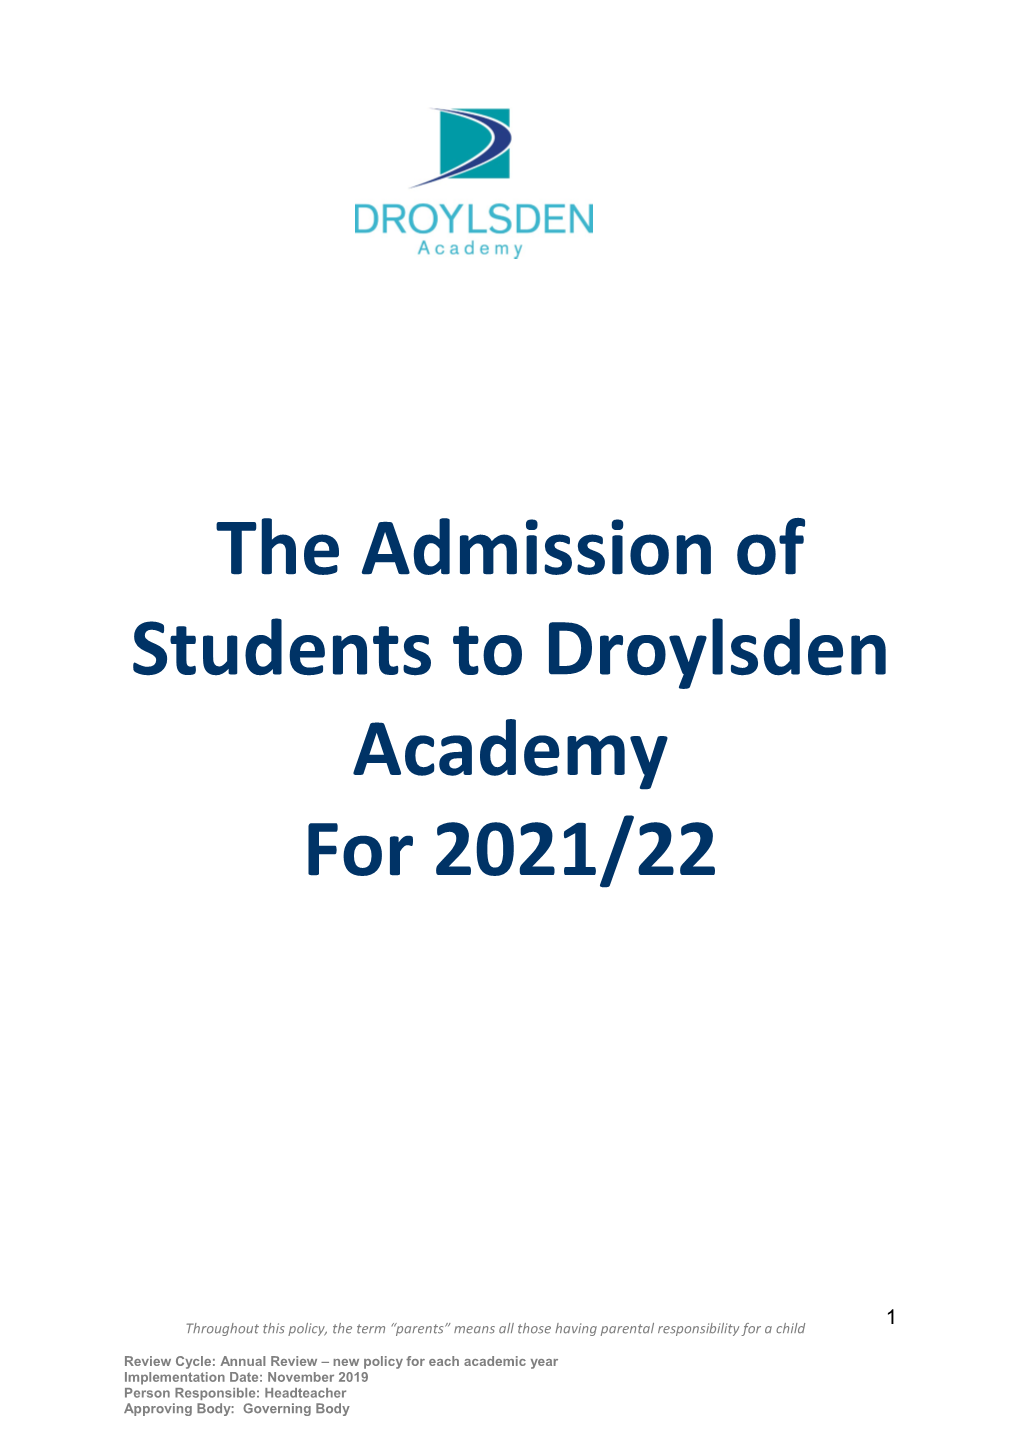 The Admission of Students to Droylsden Academy for 2021/22